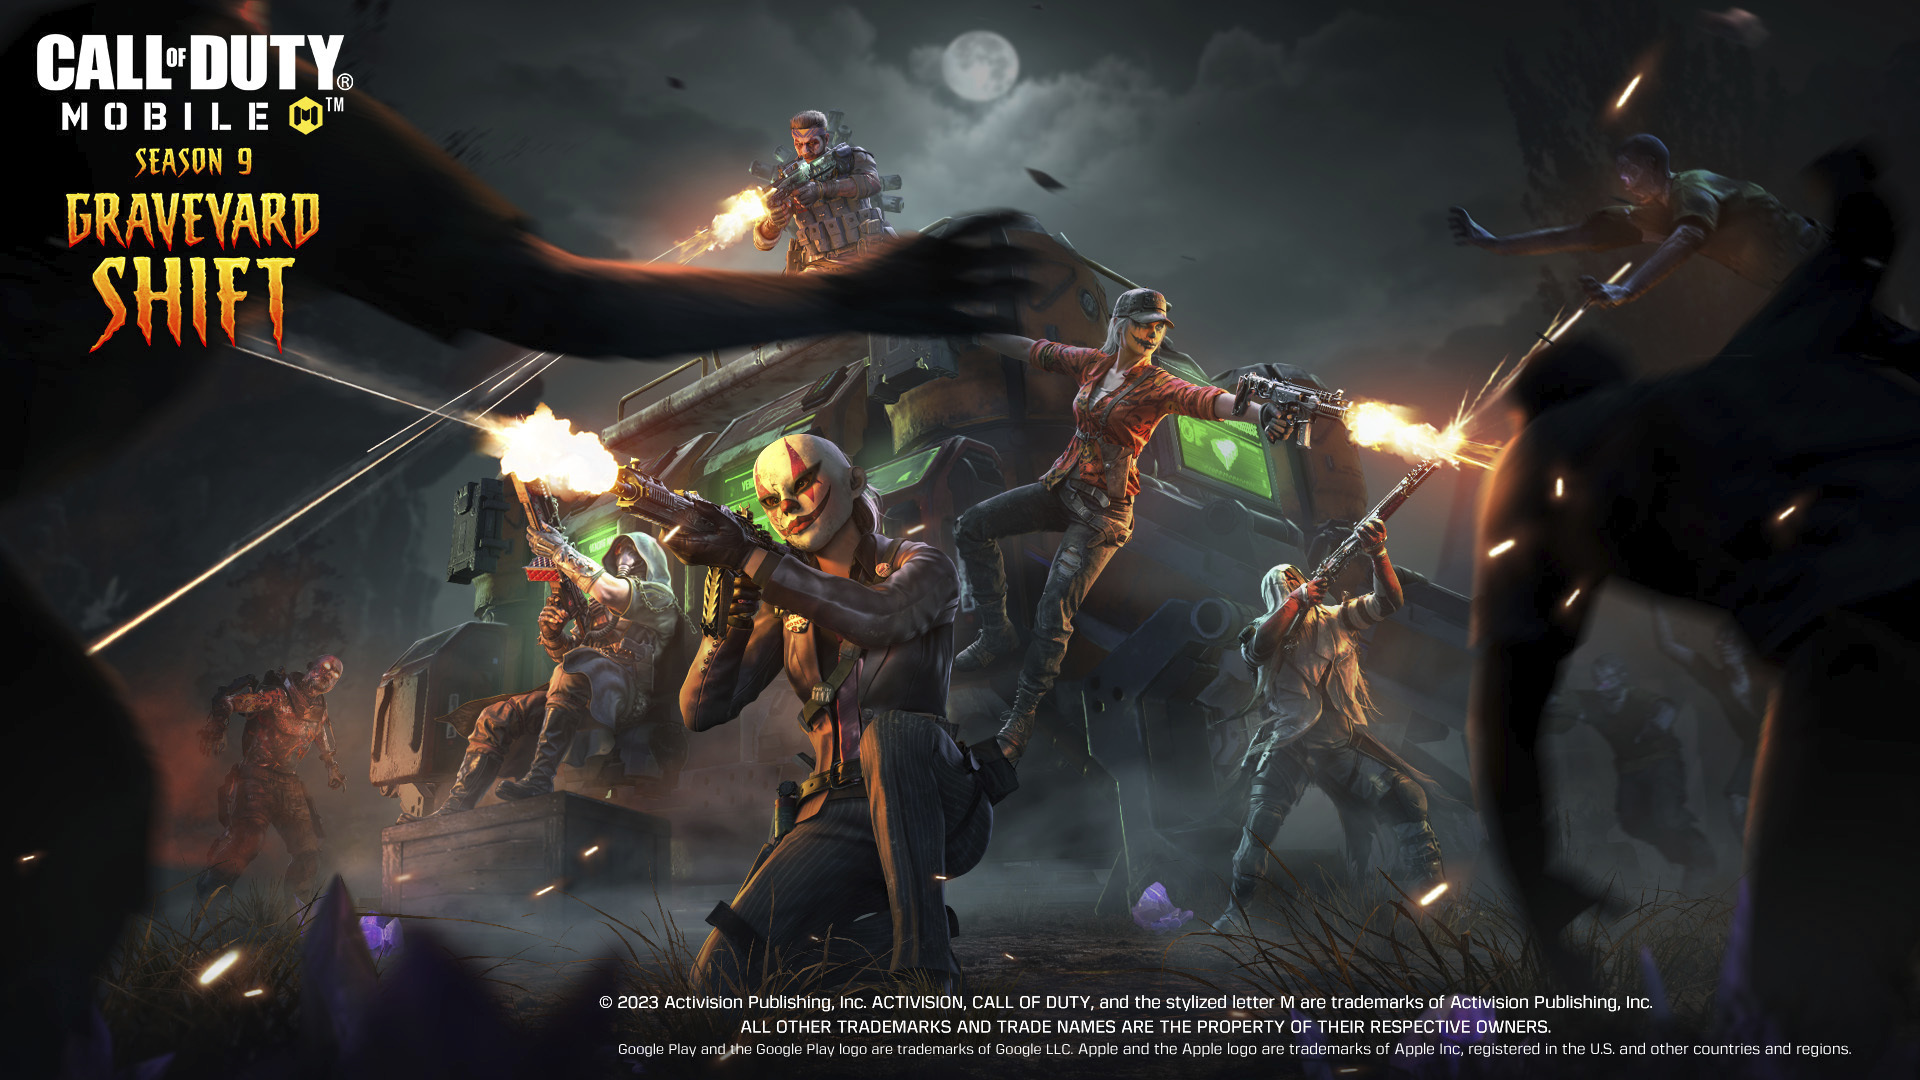 ¡Los zombies regresan a Call of Duty: Mobile! 5